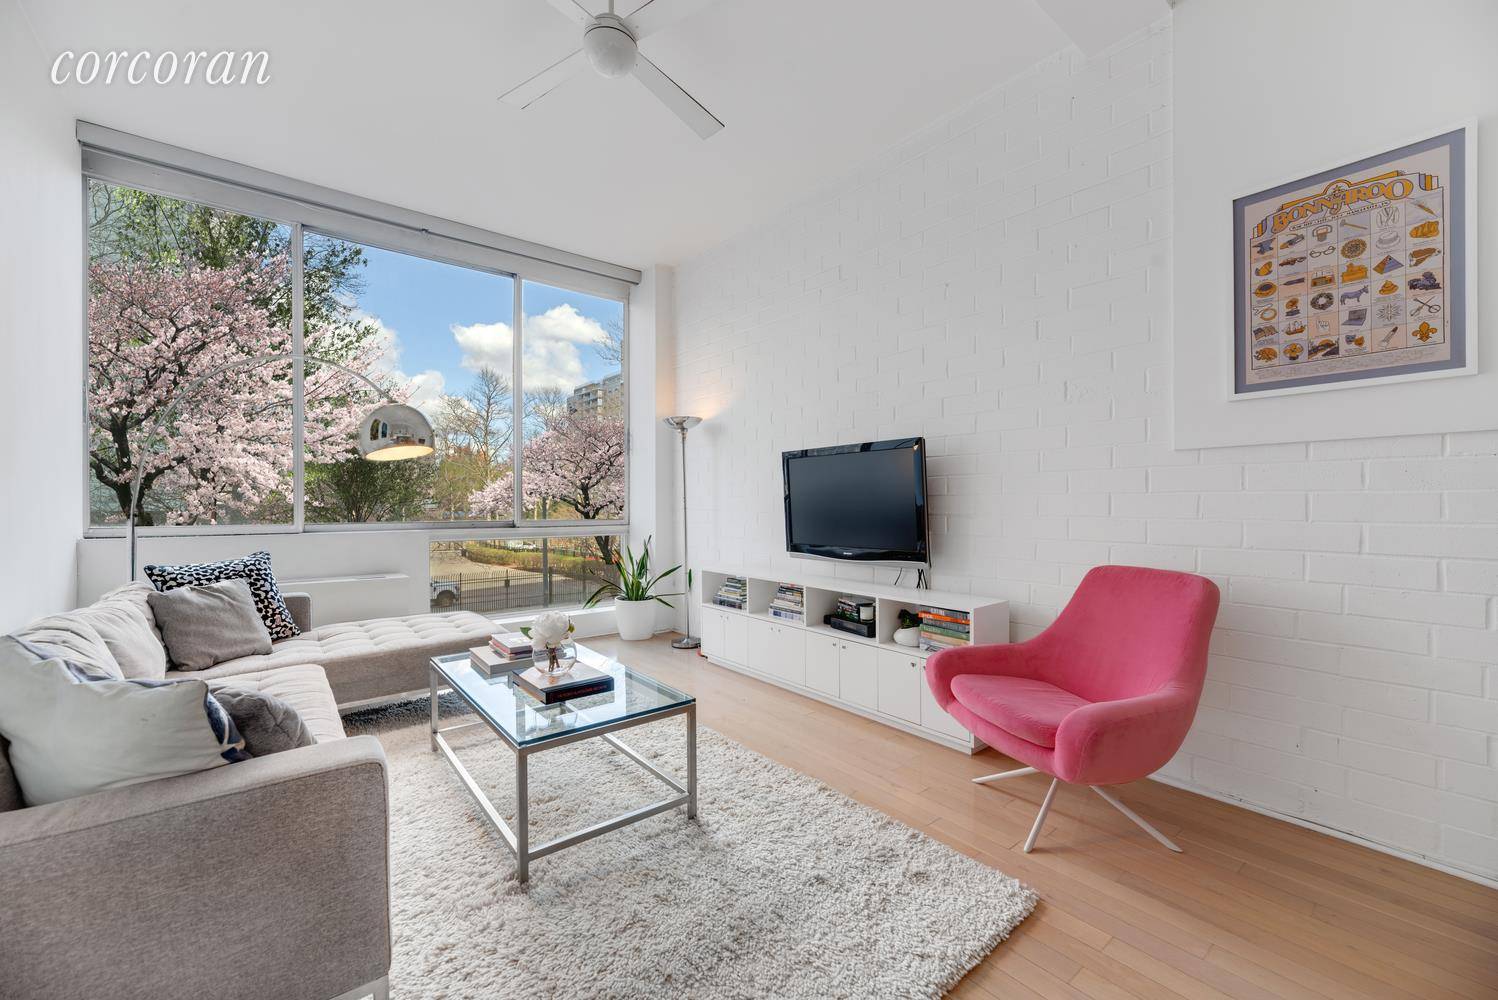 Be home in residence 209 at 77 Bleecker, a quiet and peaceful, sun drenched 1 bedroom directly overlooking the colorful tree tops of Mercer Street Park.